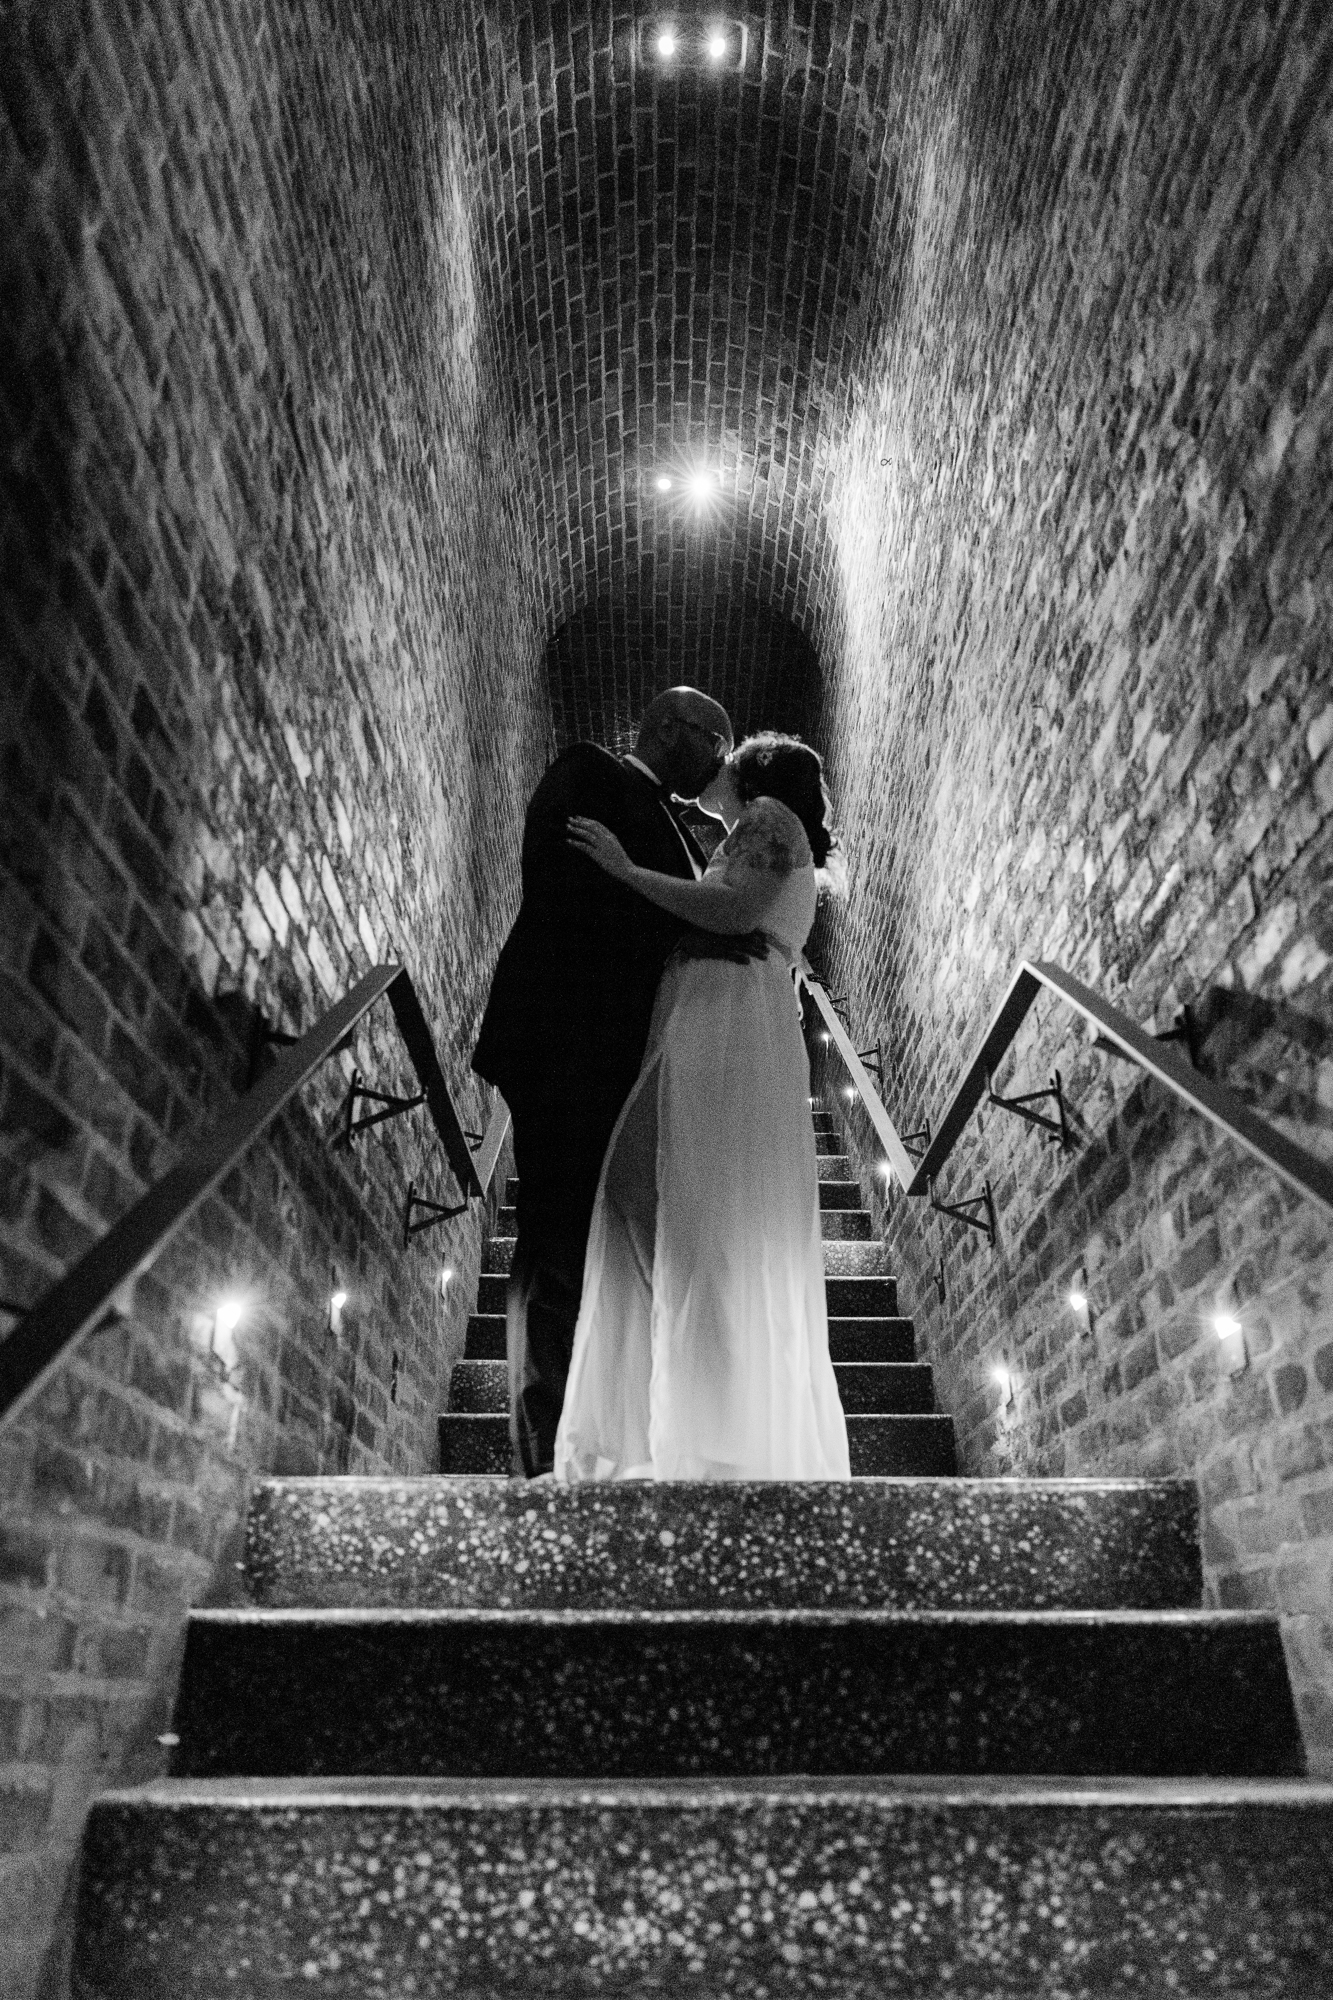 Black and white Deity Wedding Photography at Unique Event Space in Downtown Brooklyn in Autumn